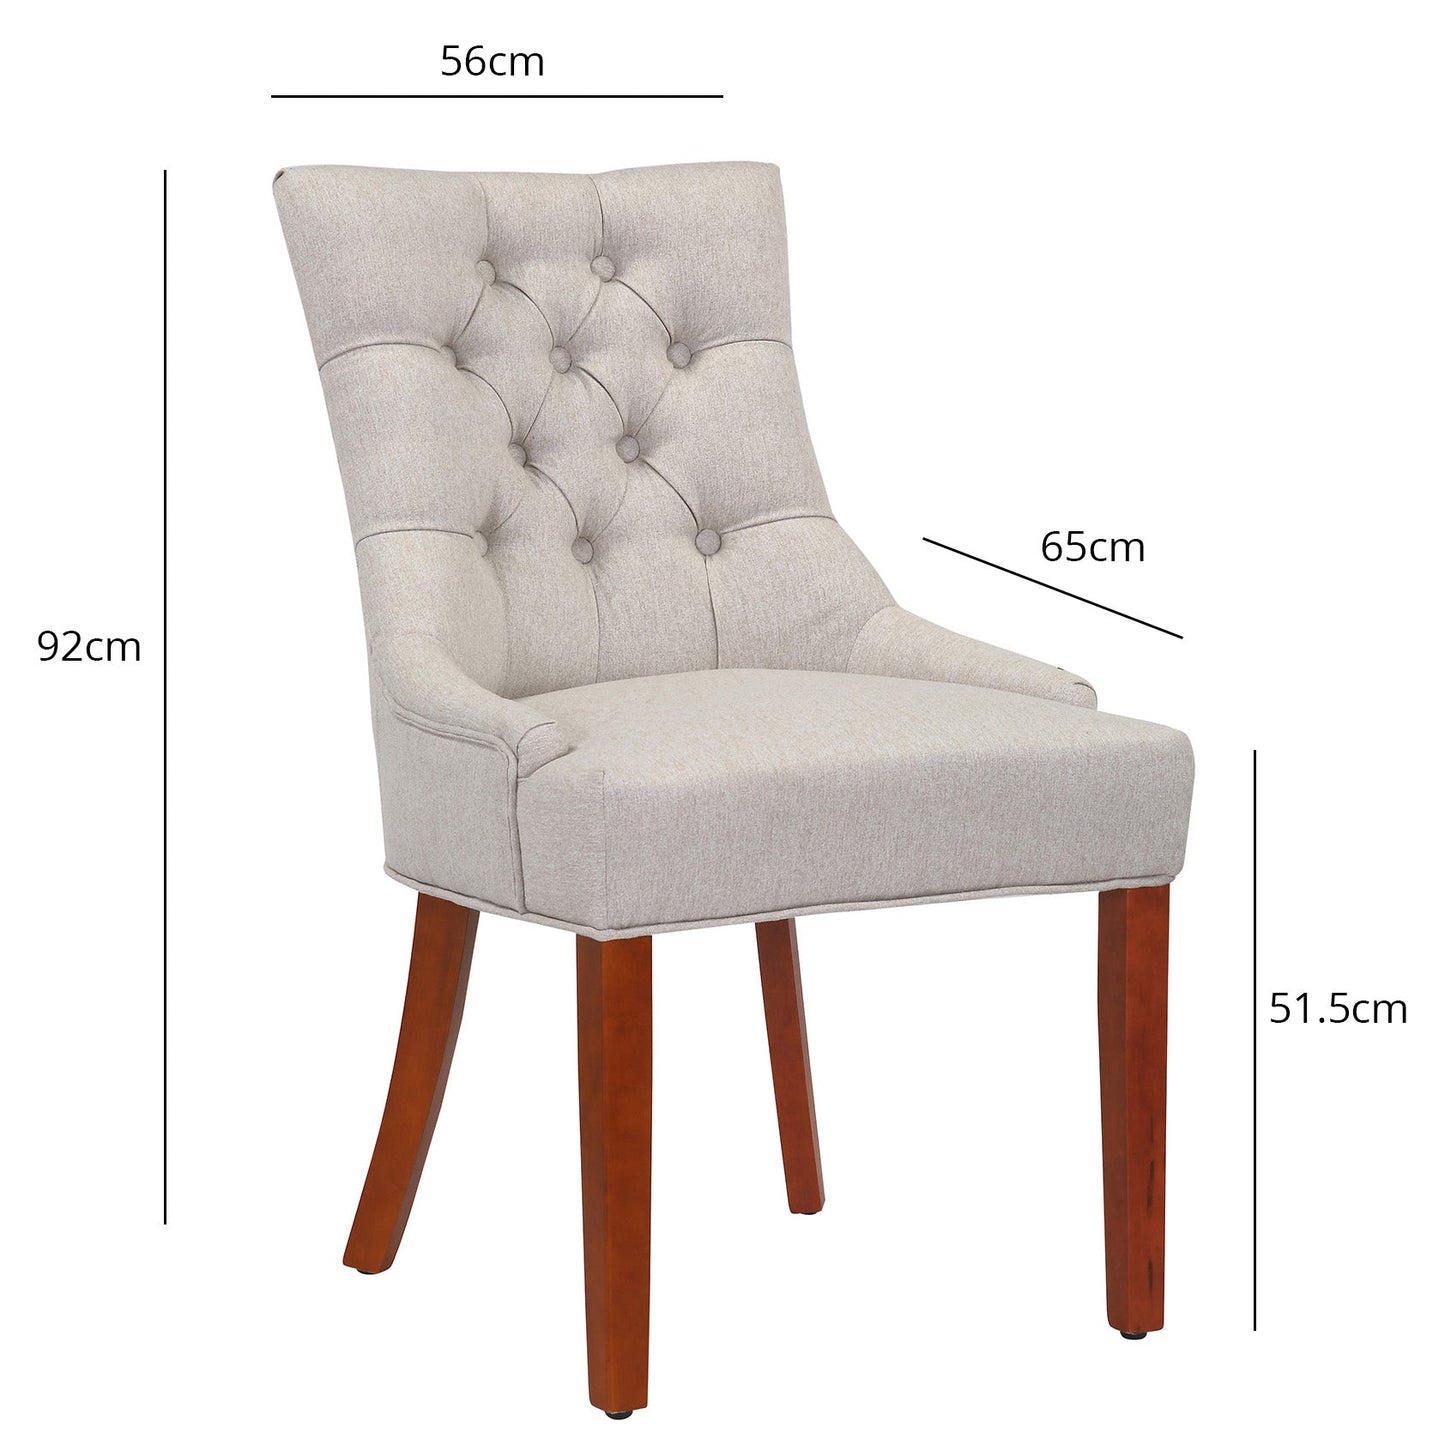 Louis dining chairs - oatmeal and dark wood - Laura James